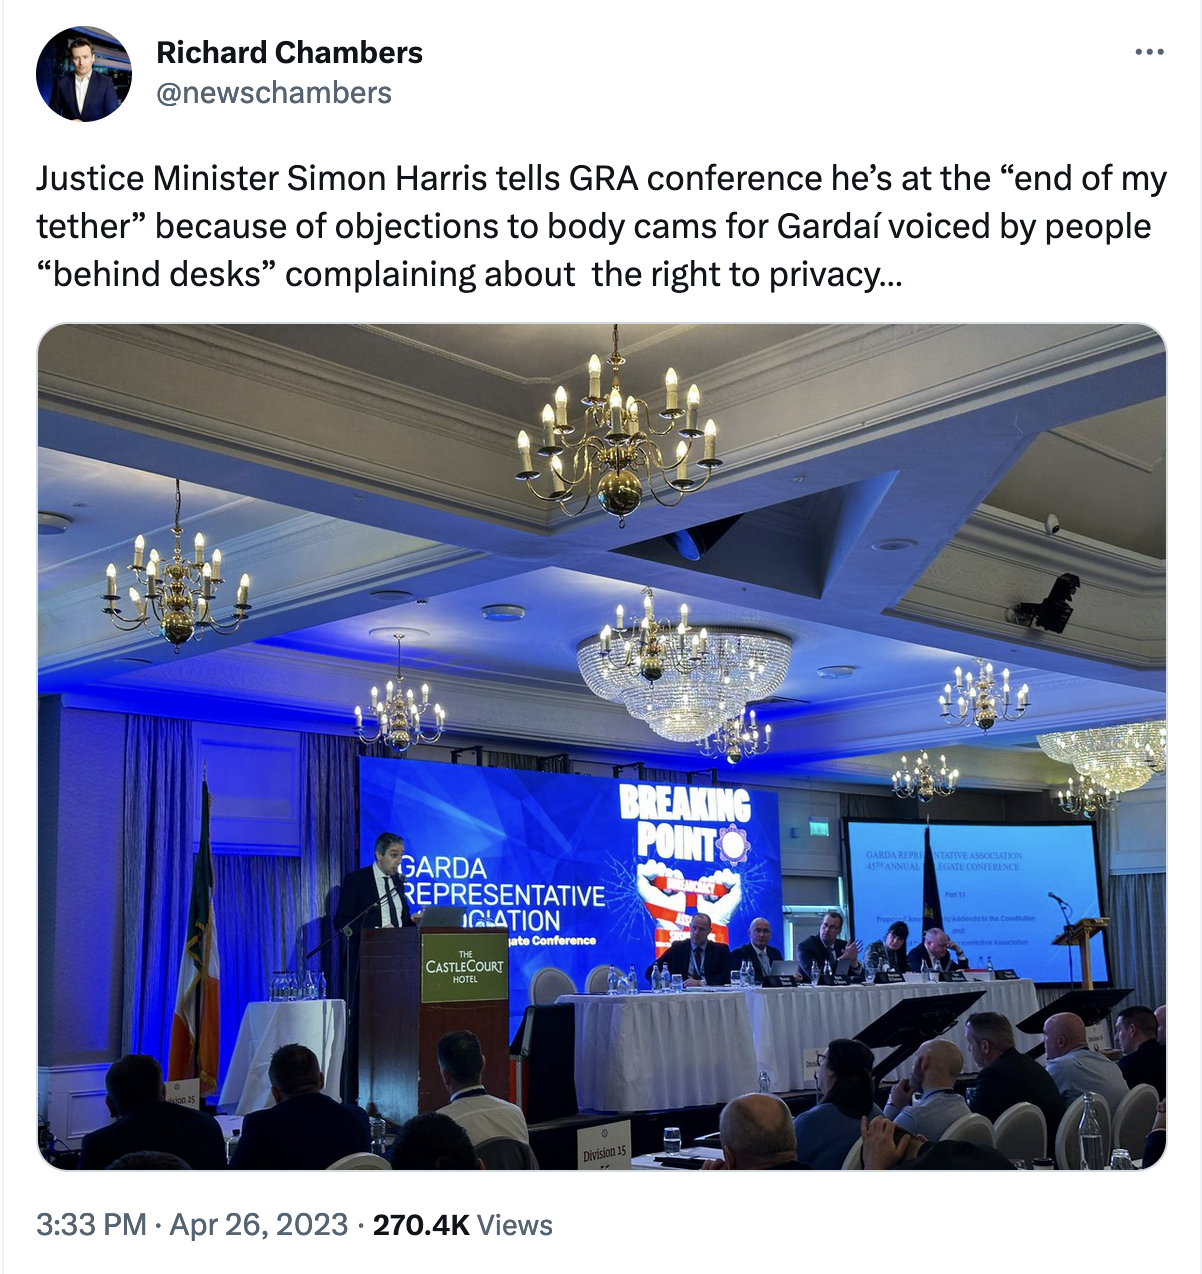 Tweet from Richard Chambers "Justice Minister Simon Harris tells GRA conference he’s at the “end of my tether” because of objections to body cams for Gardaí voiced by people “behind desks” complaining about  the right to privacy…"